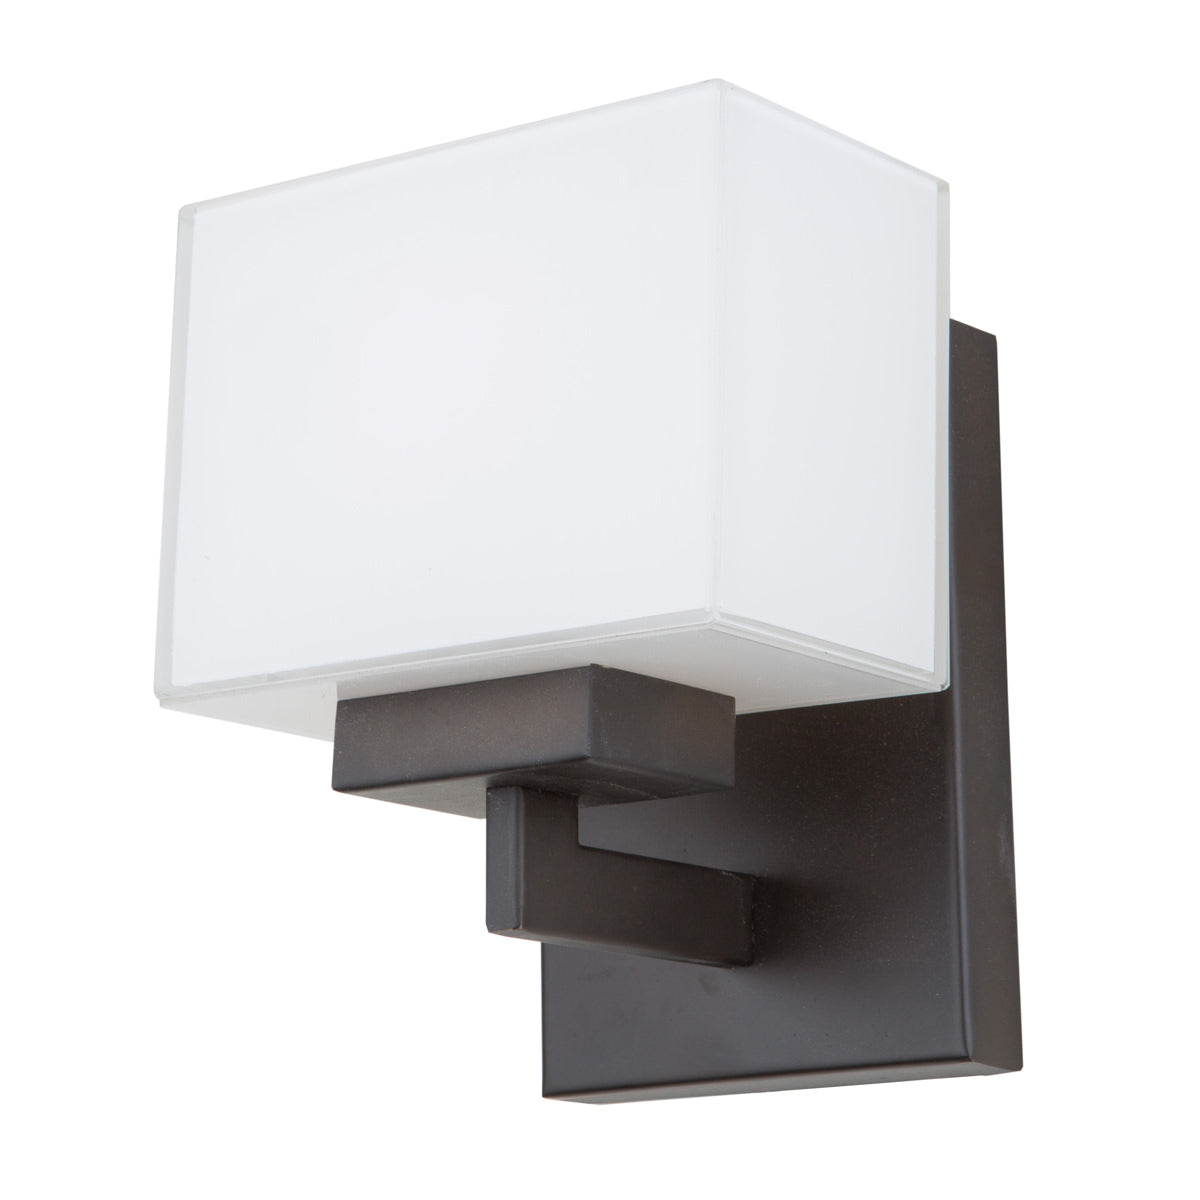 Cube Light Sconce Oil Rubbed Bronze